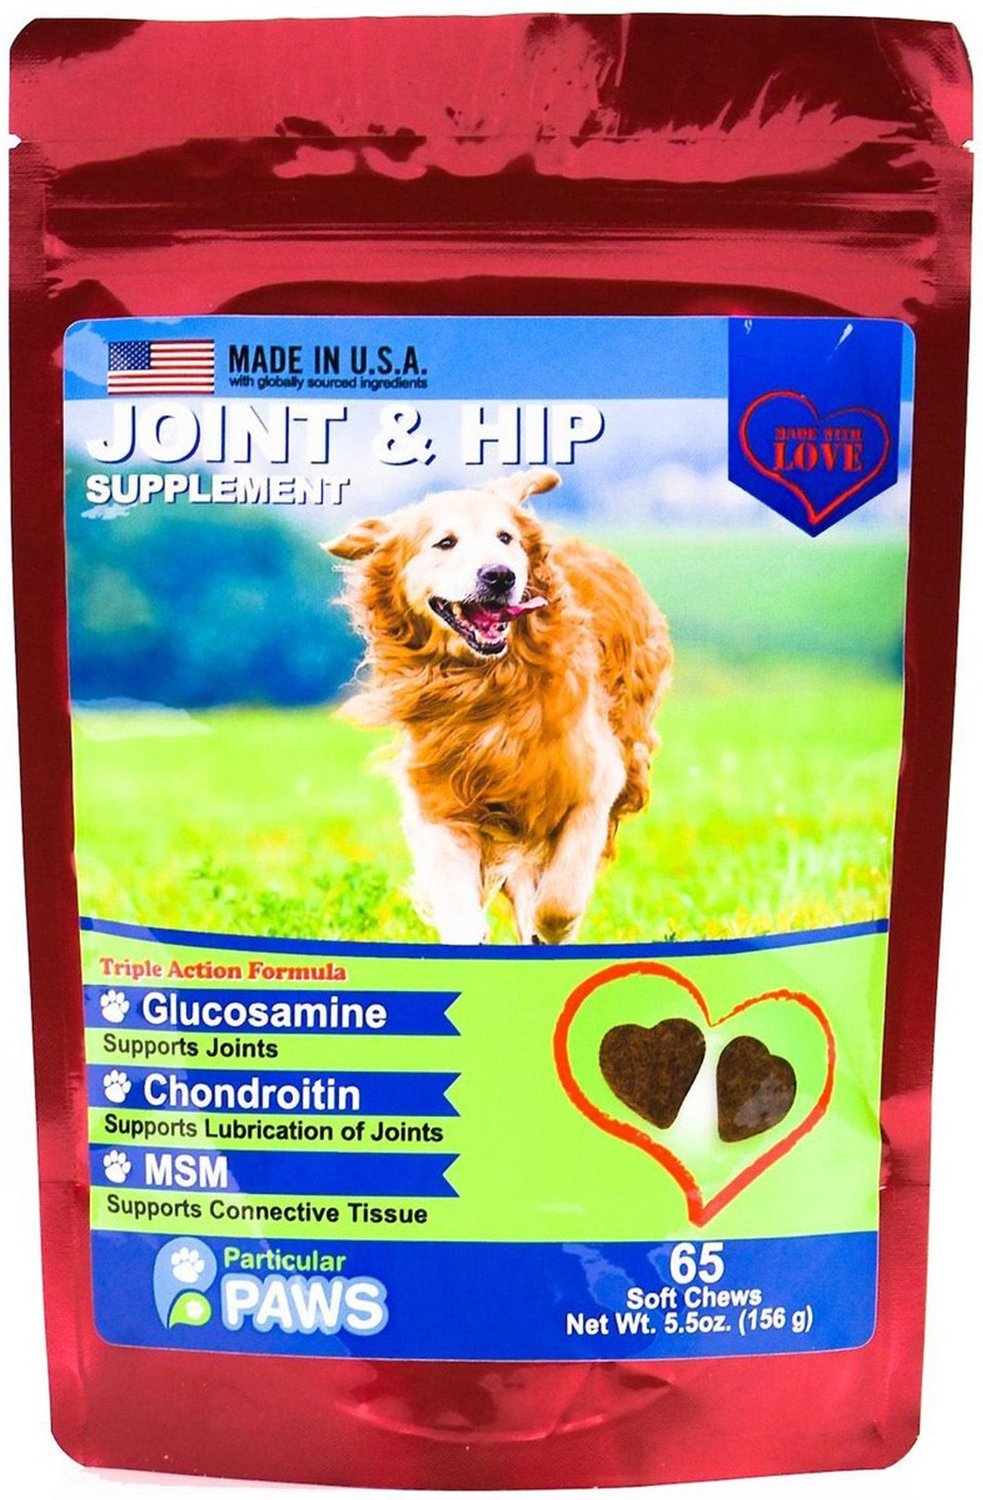 particular paws joint and hip supplement